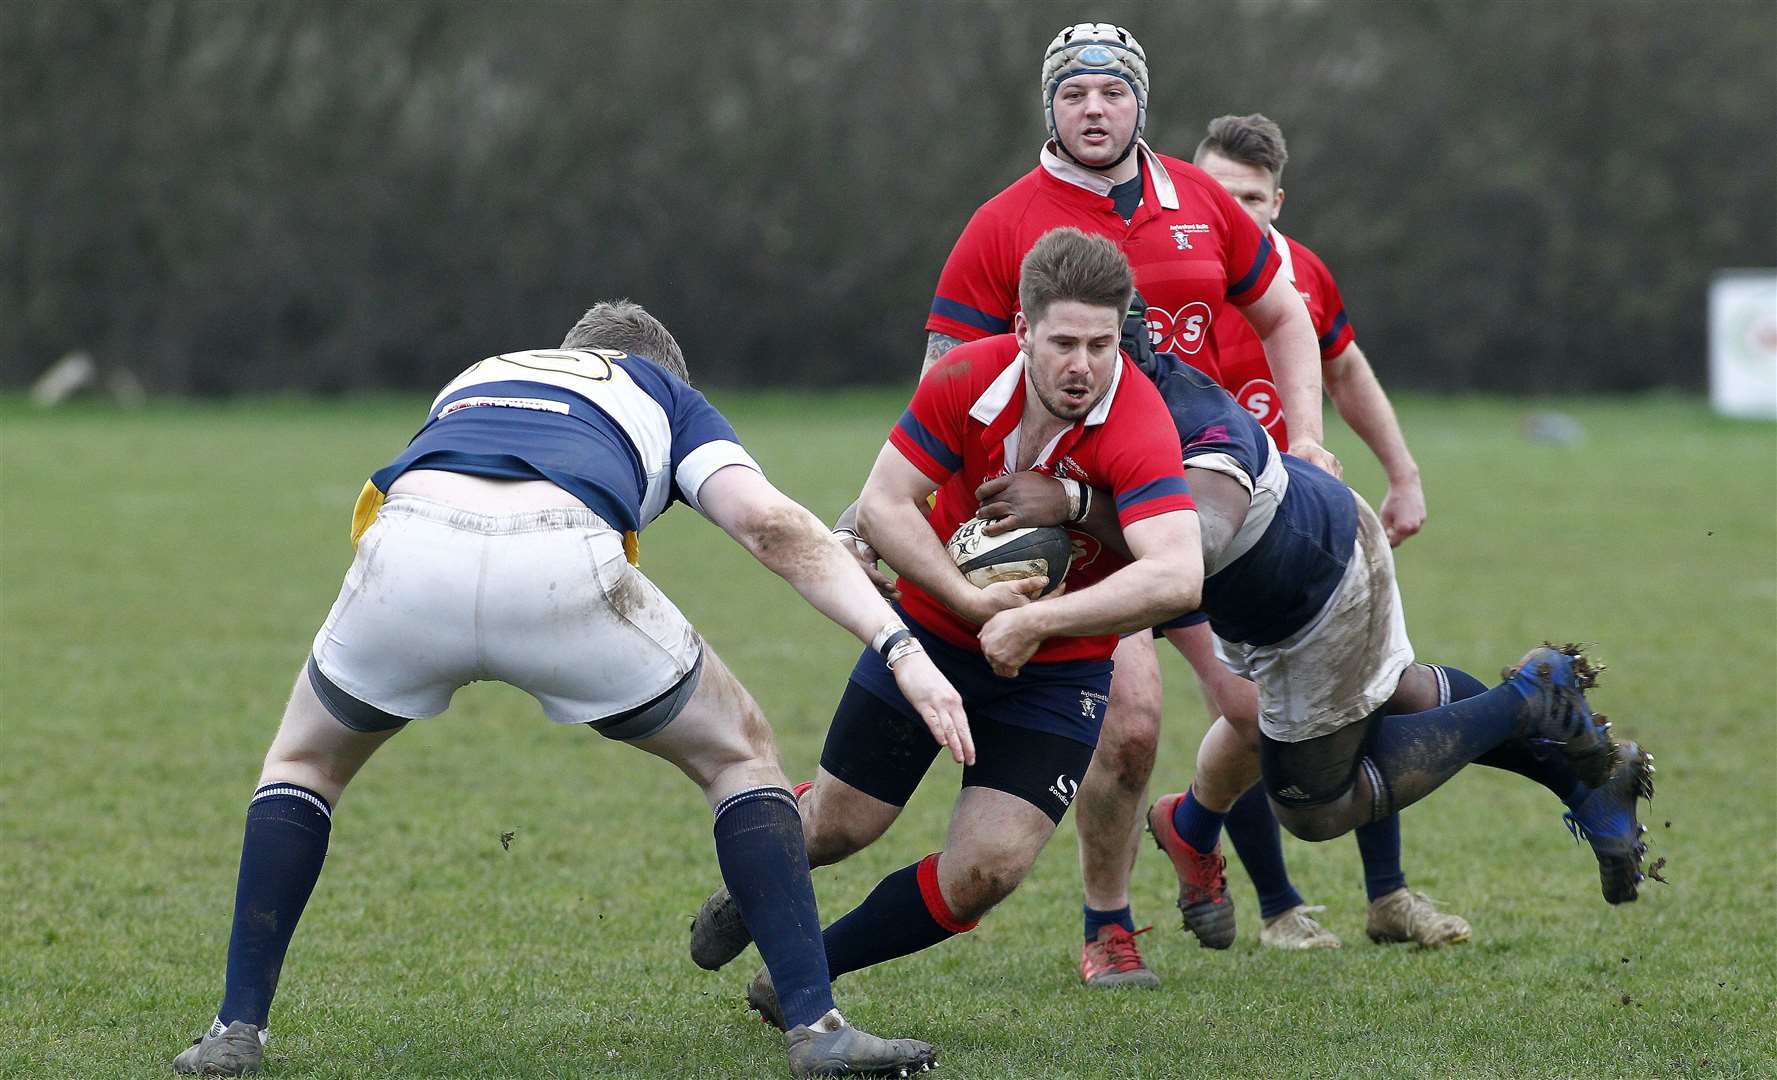 Aylesford Bulls up against Old Dustonians erlier this year Picture: Sean Aidan